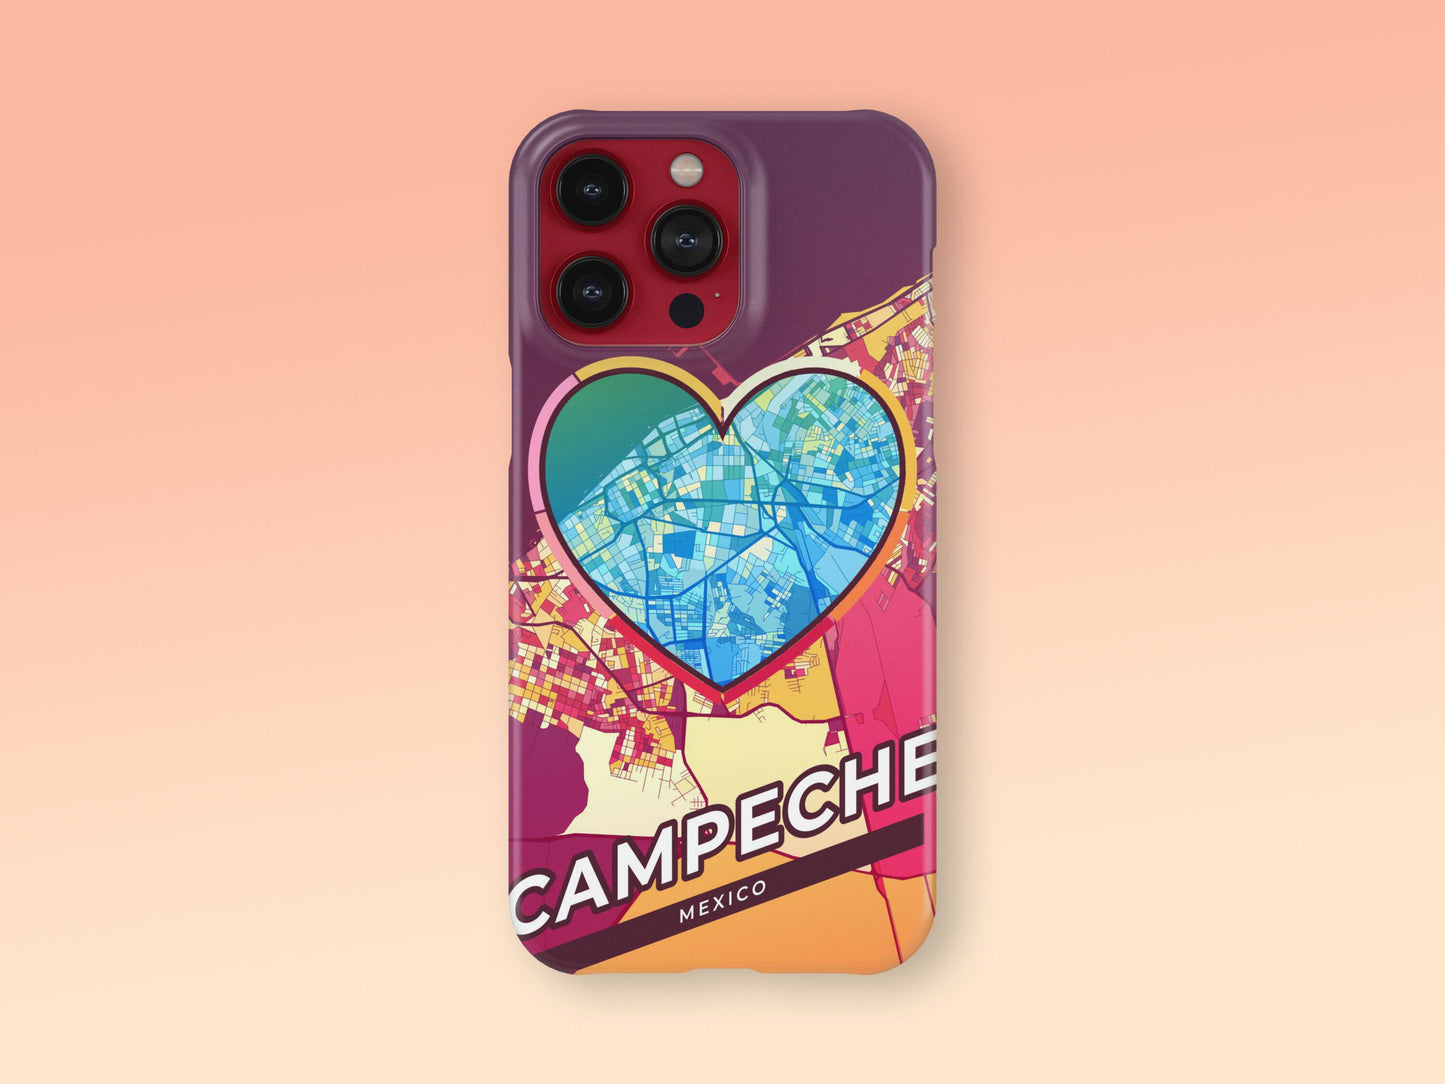 Campeche Mexico slim phone case with colorful icon. Birthday, wedding or housewarming gift. Couple match cases. 2